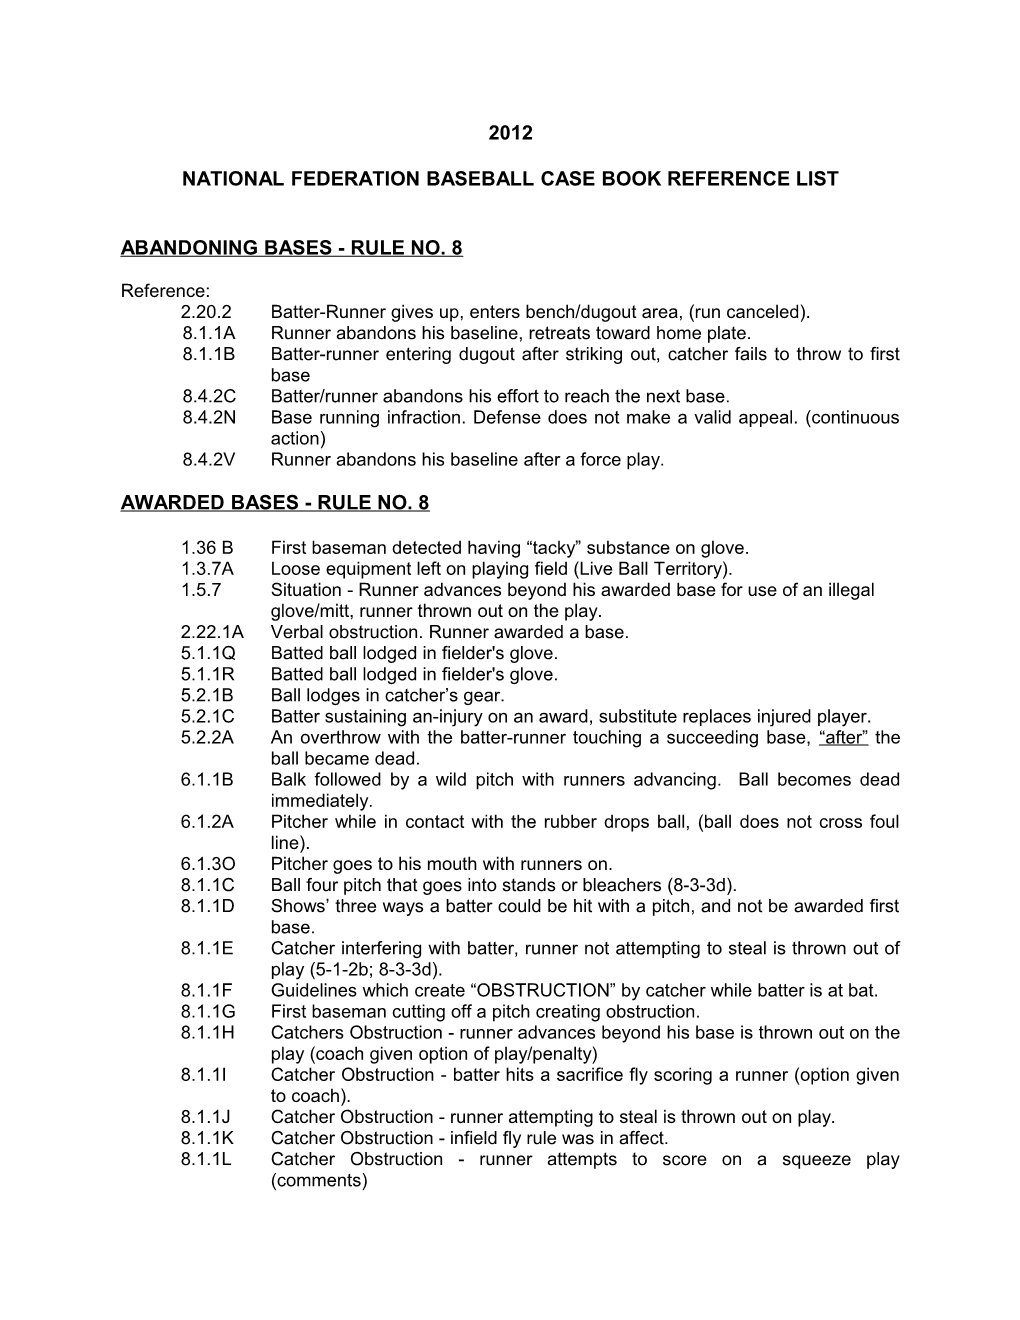 National Federation Baseball Case Book Reference List